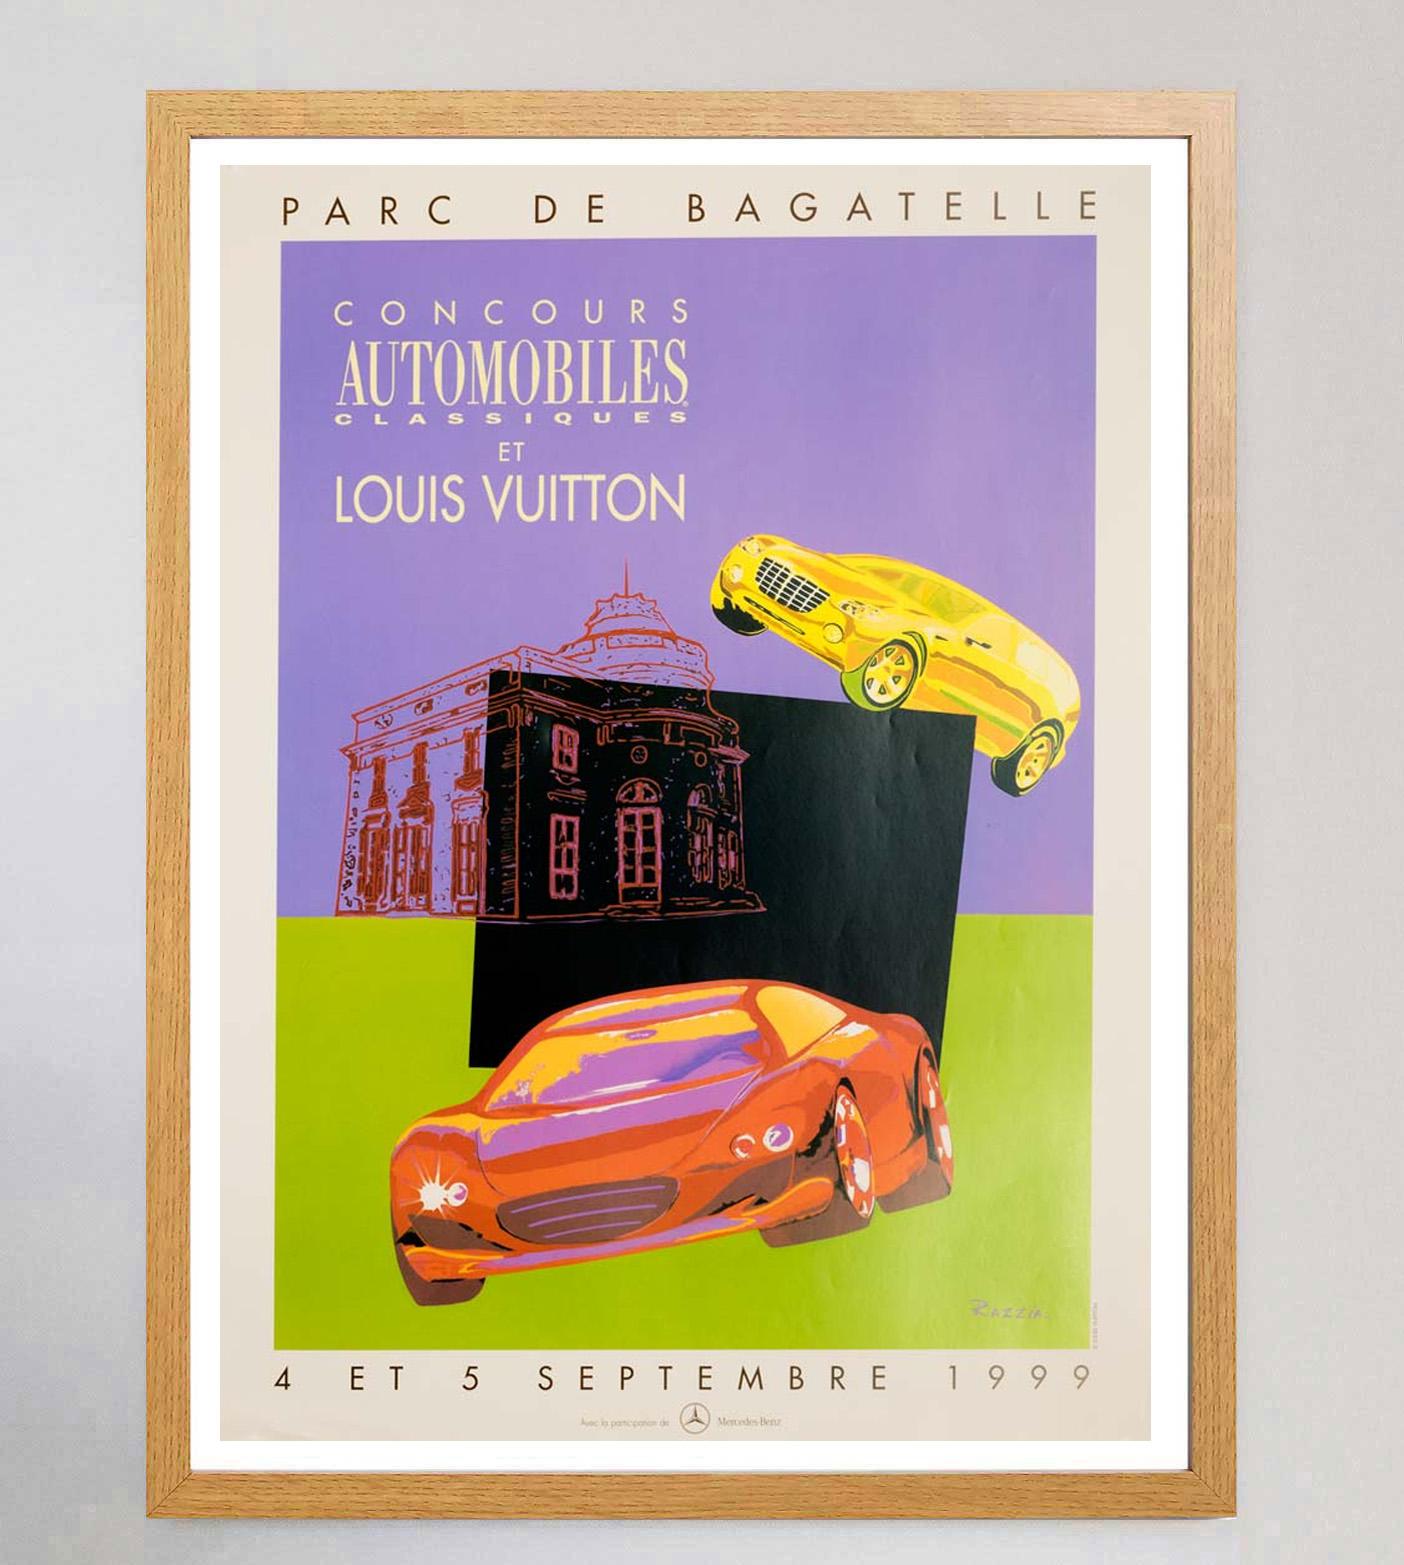 The Louis Vuitton Bagatelle Concours Automobiles Classiques is an annual event held in the Parc de Bagatelle in Paris, France beginning in 1988. This beautiful piece from 1999 evokes a pop art style with vibrant pastel shapes. 

Beautifully